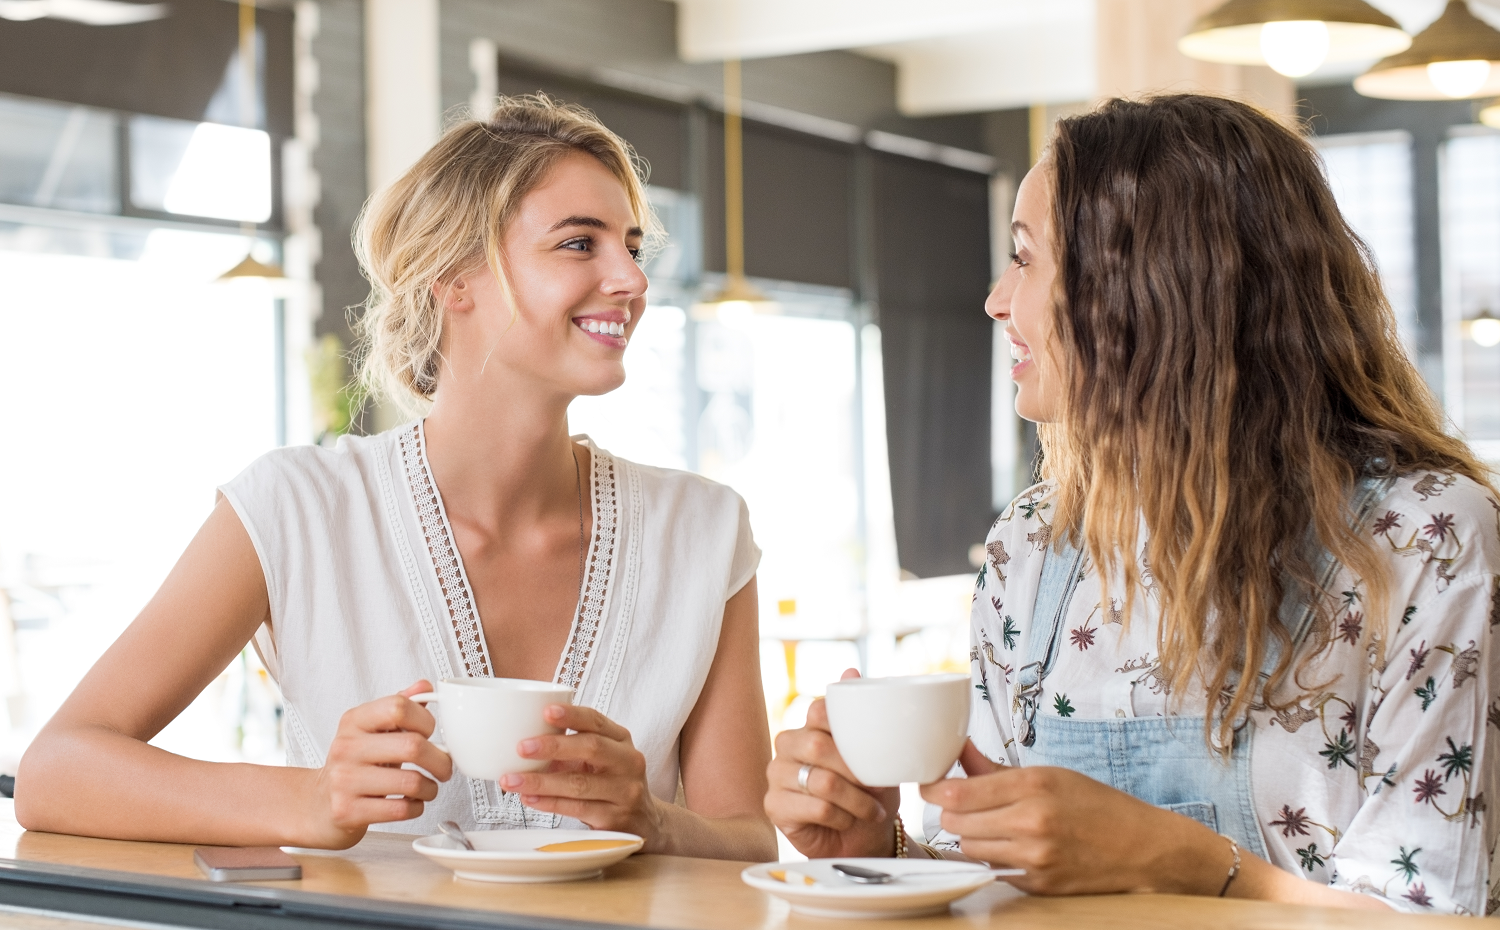 Two women chatting together over coffee in a café as part of an employee wellbeing and staff engagement strategy